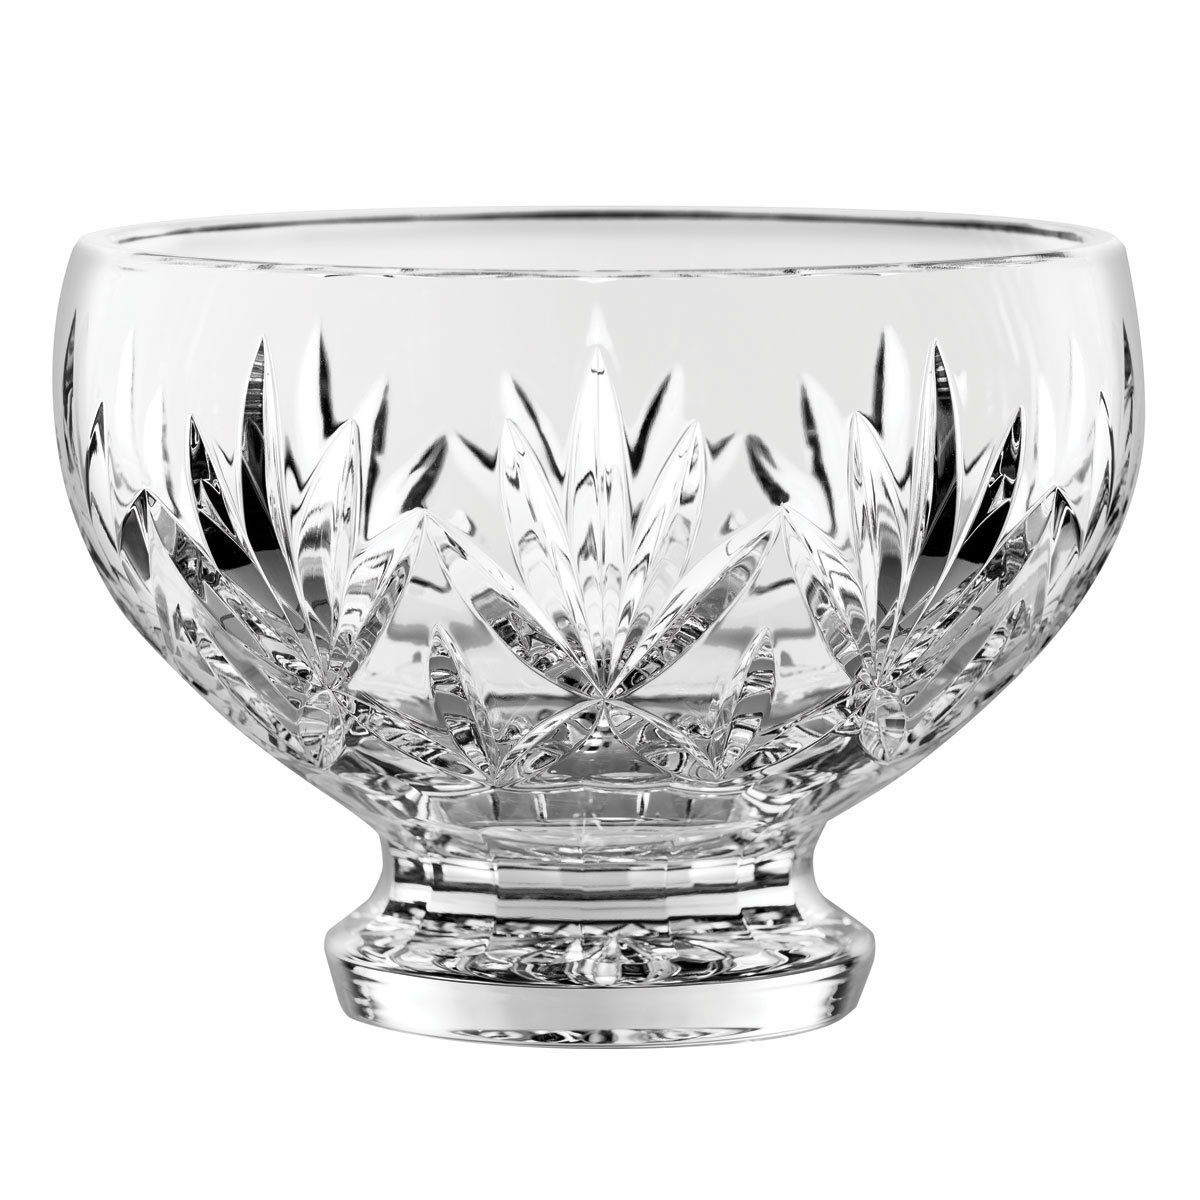 Marquis by Waterford Crystal, Caprice 10" Footed Crystal Bowl